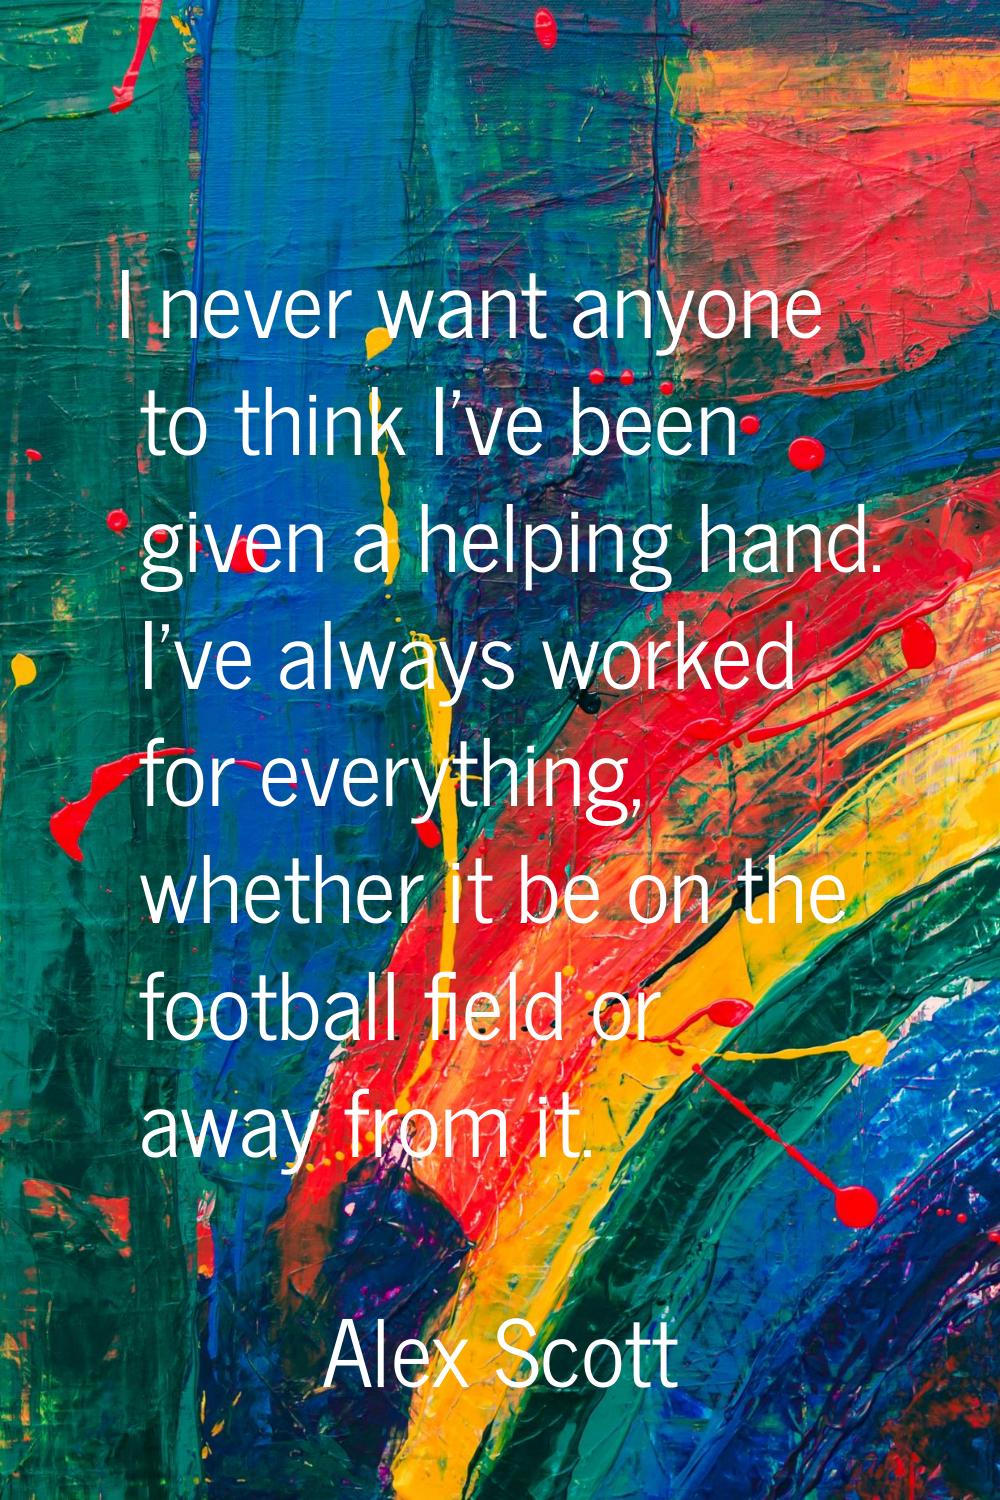 I never want anyone to think I've been given a helping hand. I've always worked for everything, whe